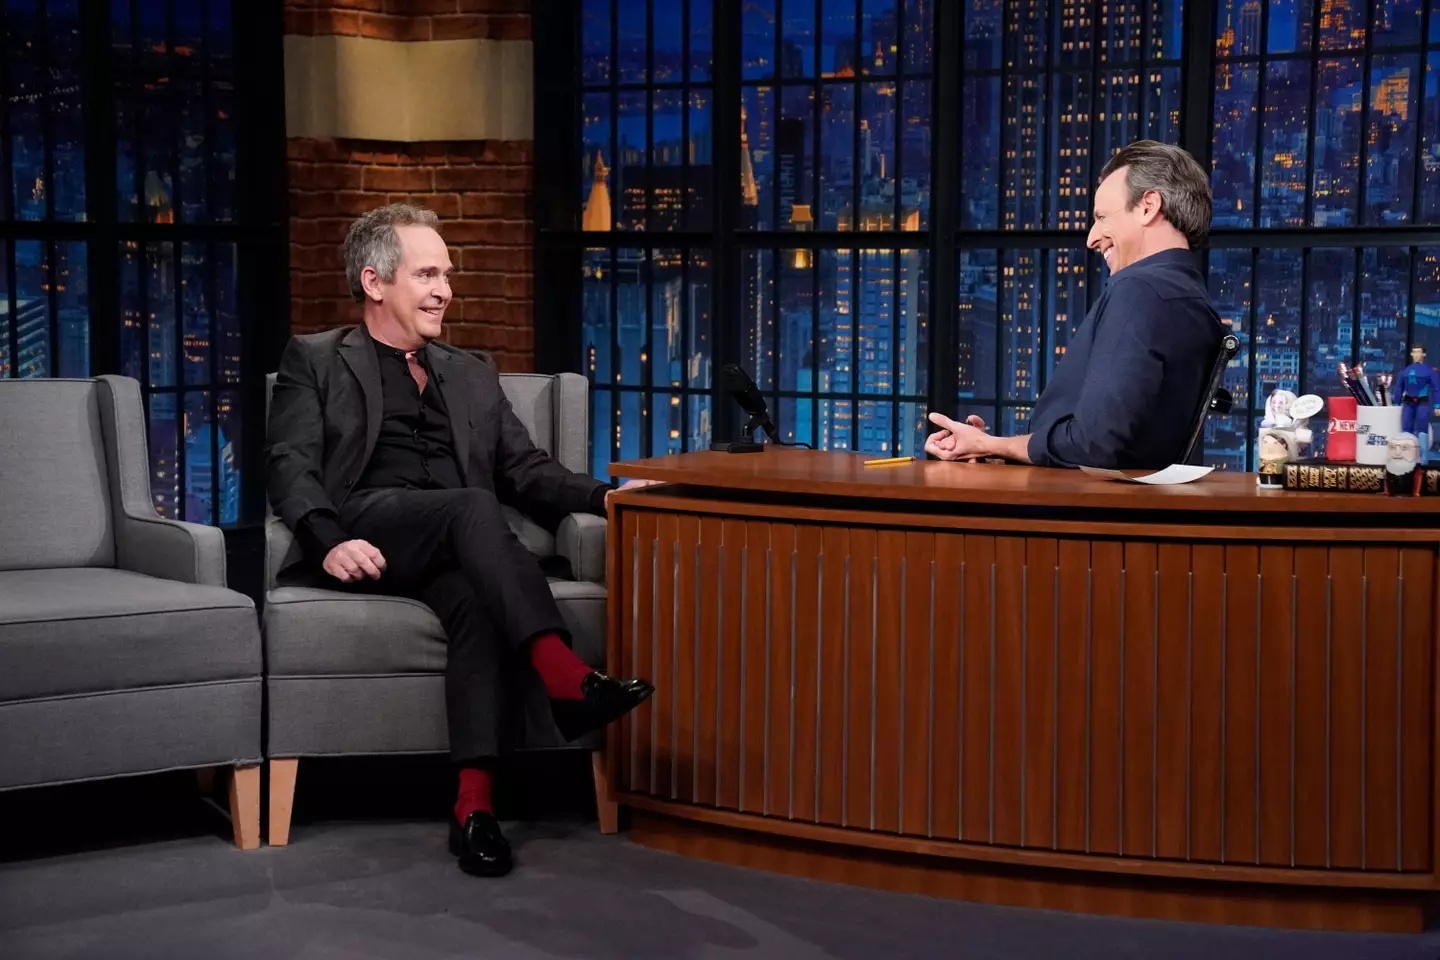 Tom Hollander in his appearance on The Late Show with Seth Meyers.